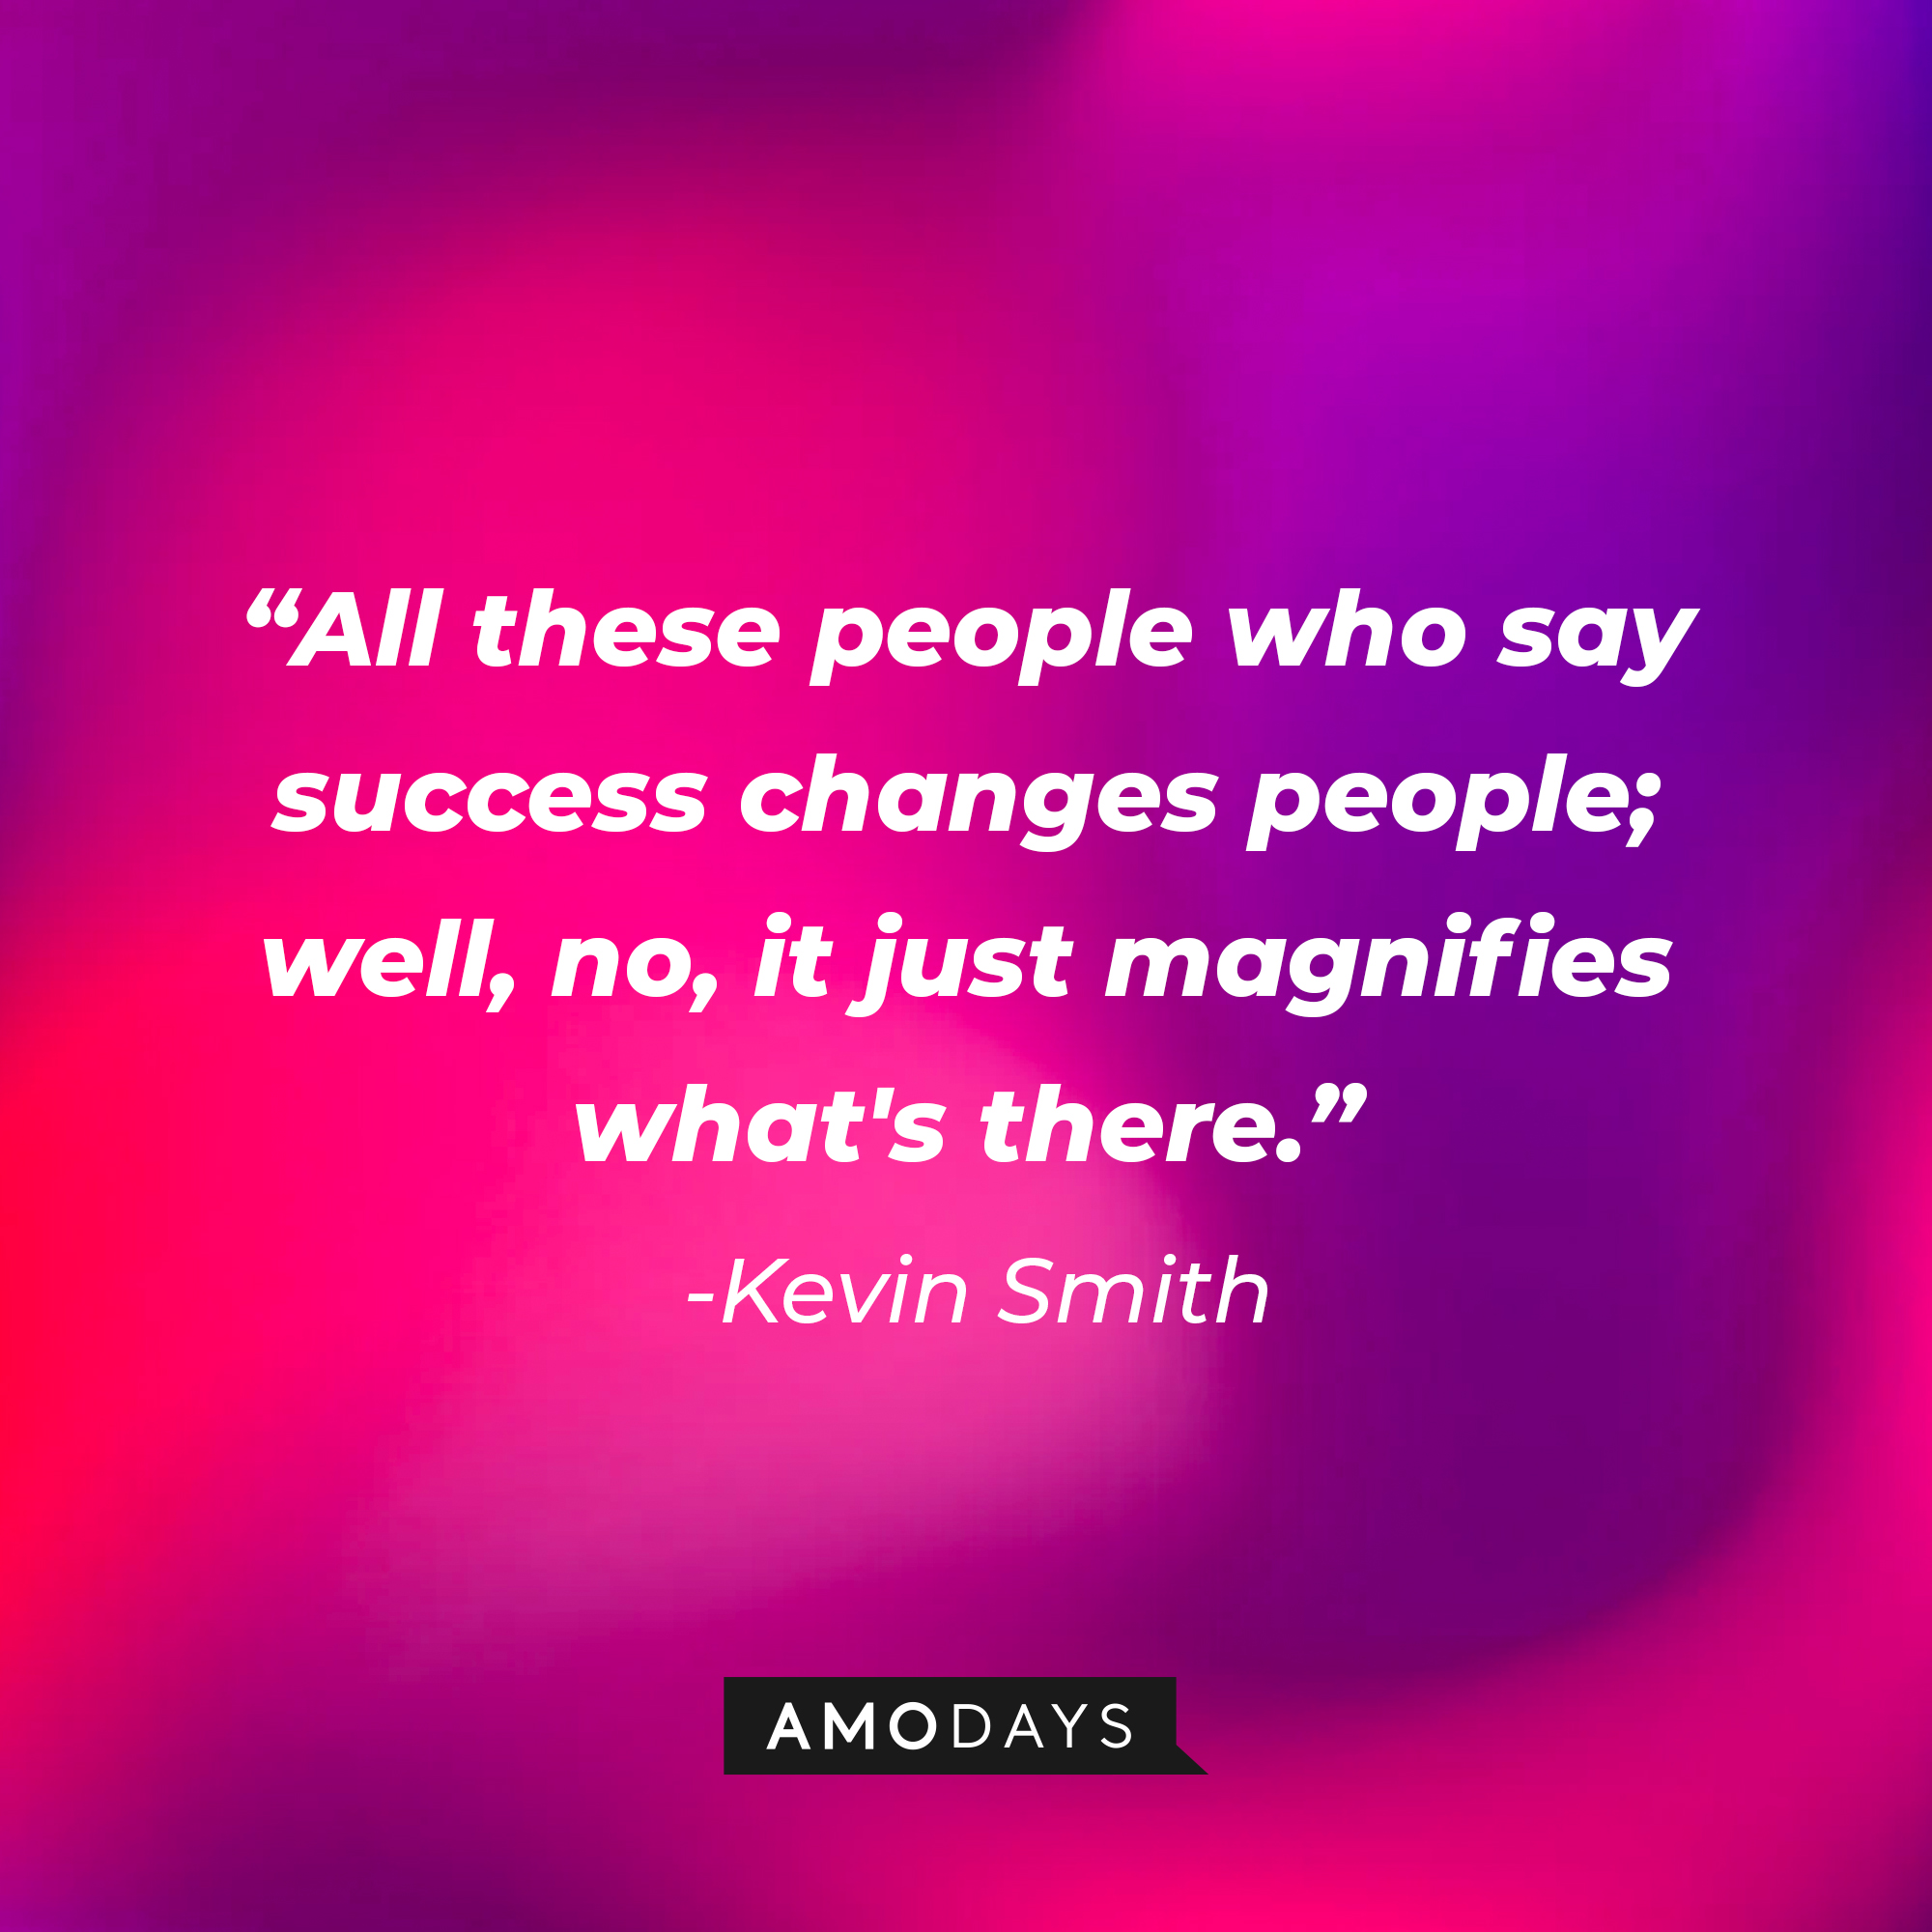 Kevin Smith’s quote: “All these people who say success changes people; well, no, it just magnifies what's there.” | Source: AmoDays